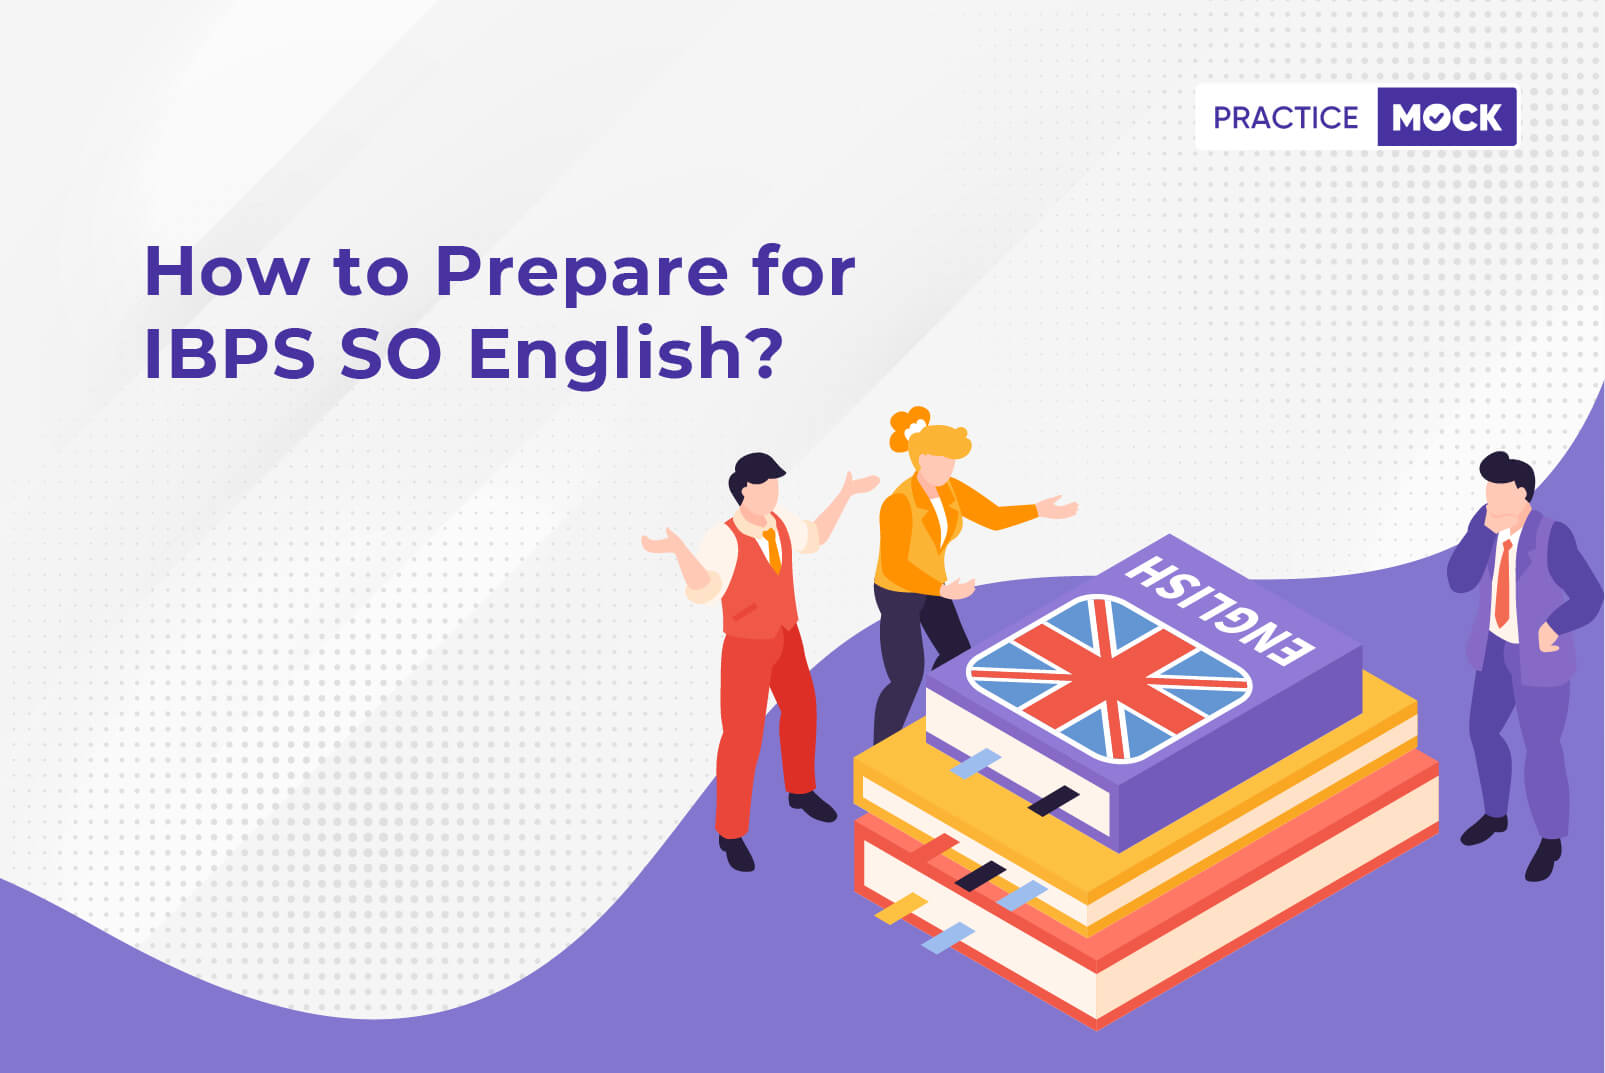 How to prepare for IBPS SO English?